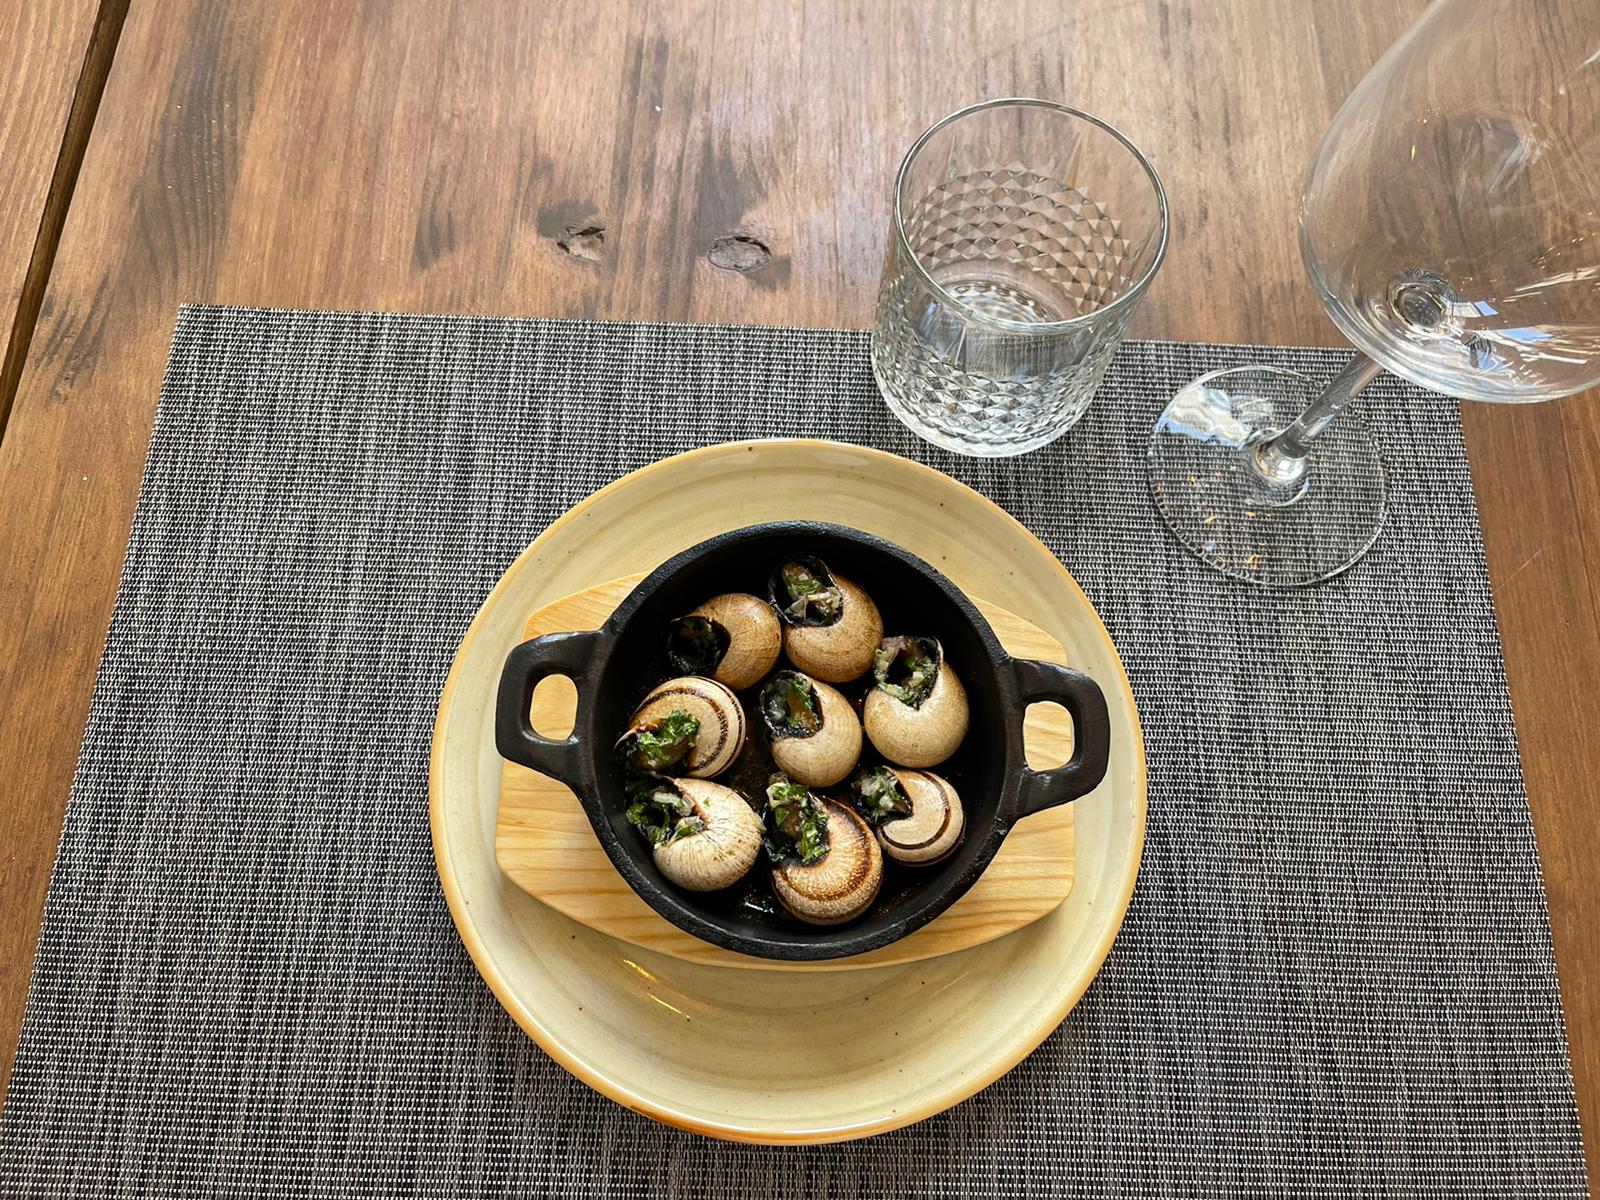 Snails with Garlic and Parsley Butter